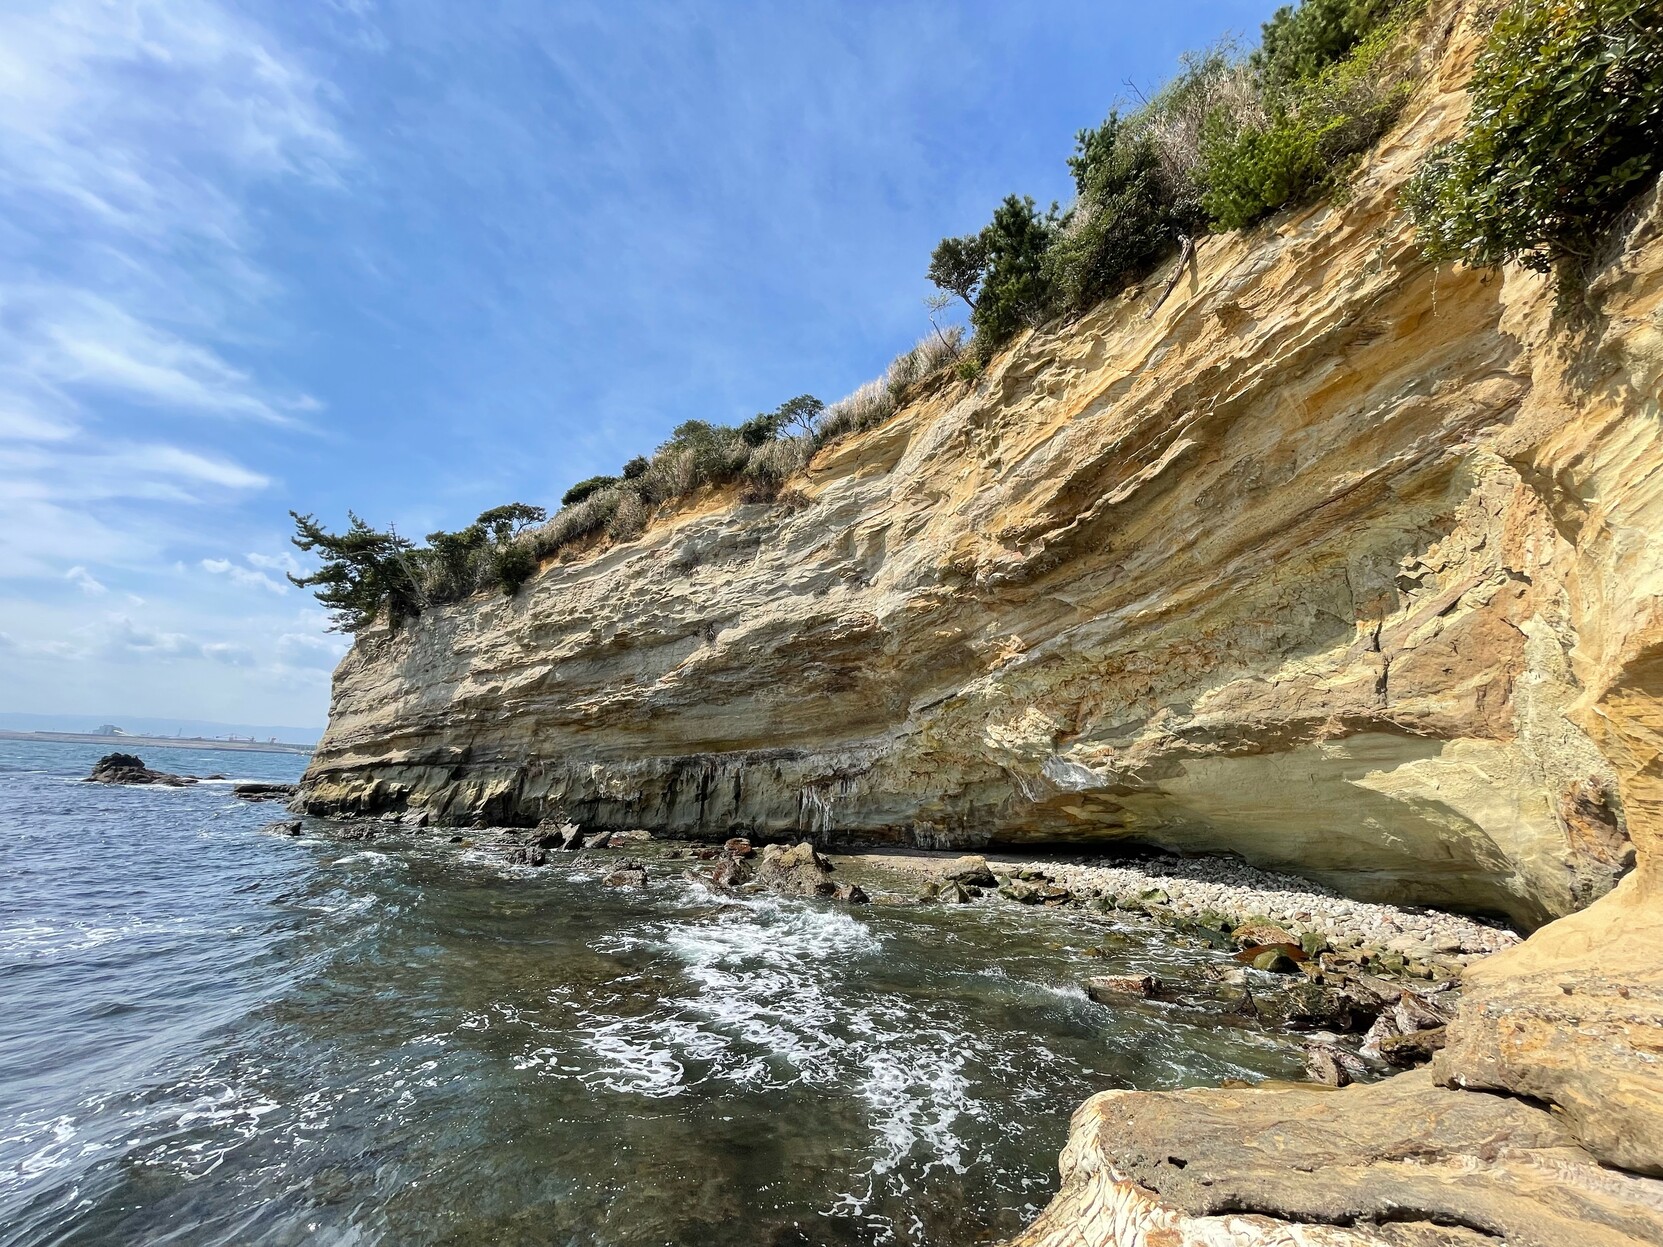 View from shore looking along high sandy cliffs with lots of different layers visible in the rock. The blue sky and ocean are visible on the left, and scrubby trees line the top of the cliff.